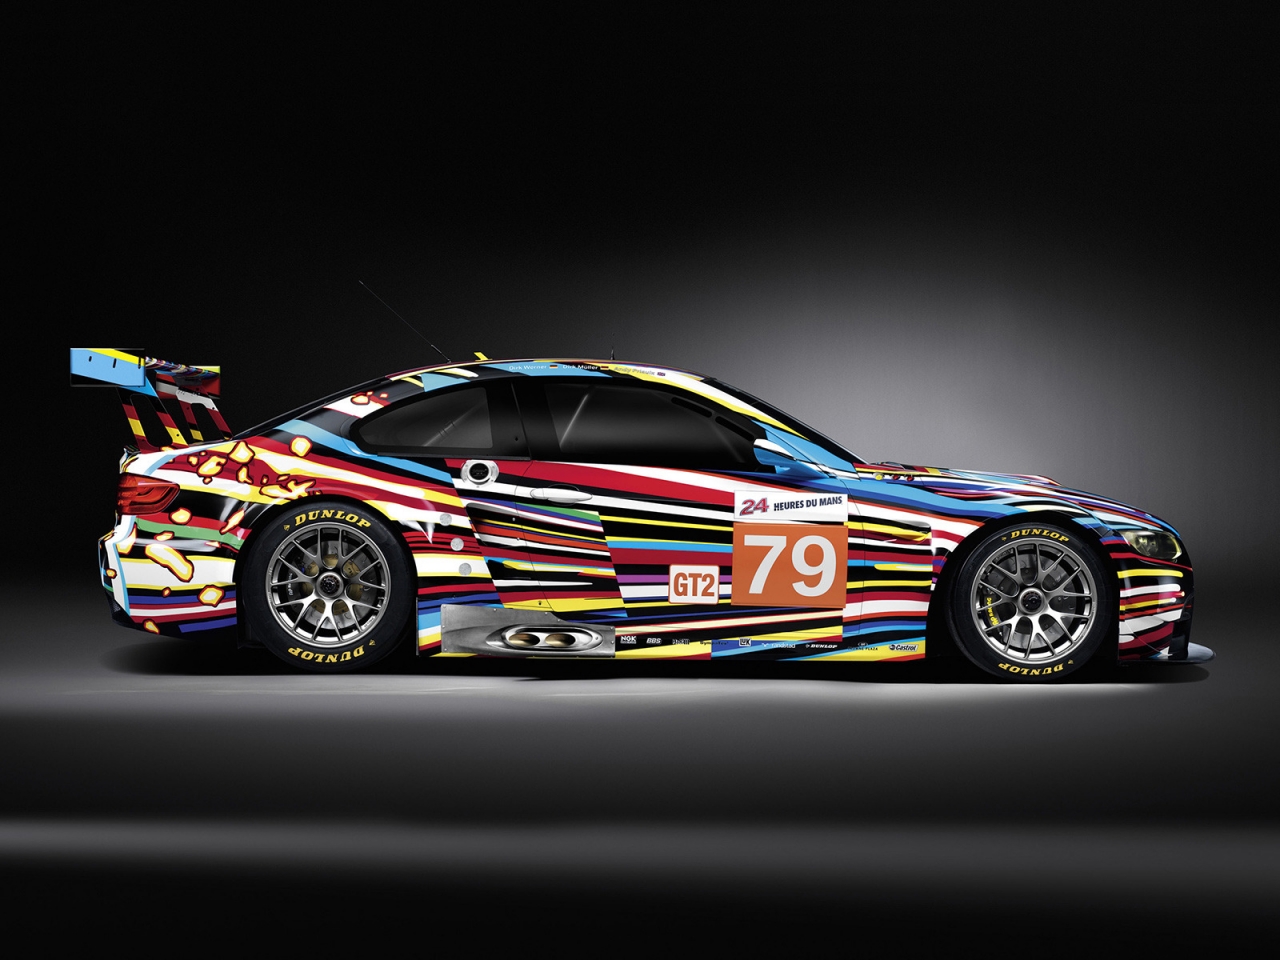 BMW M3 GT 2 Art Side for 1280 x 960 resolution